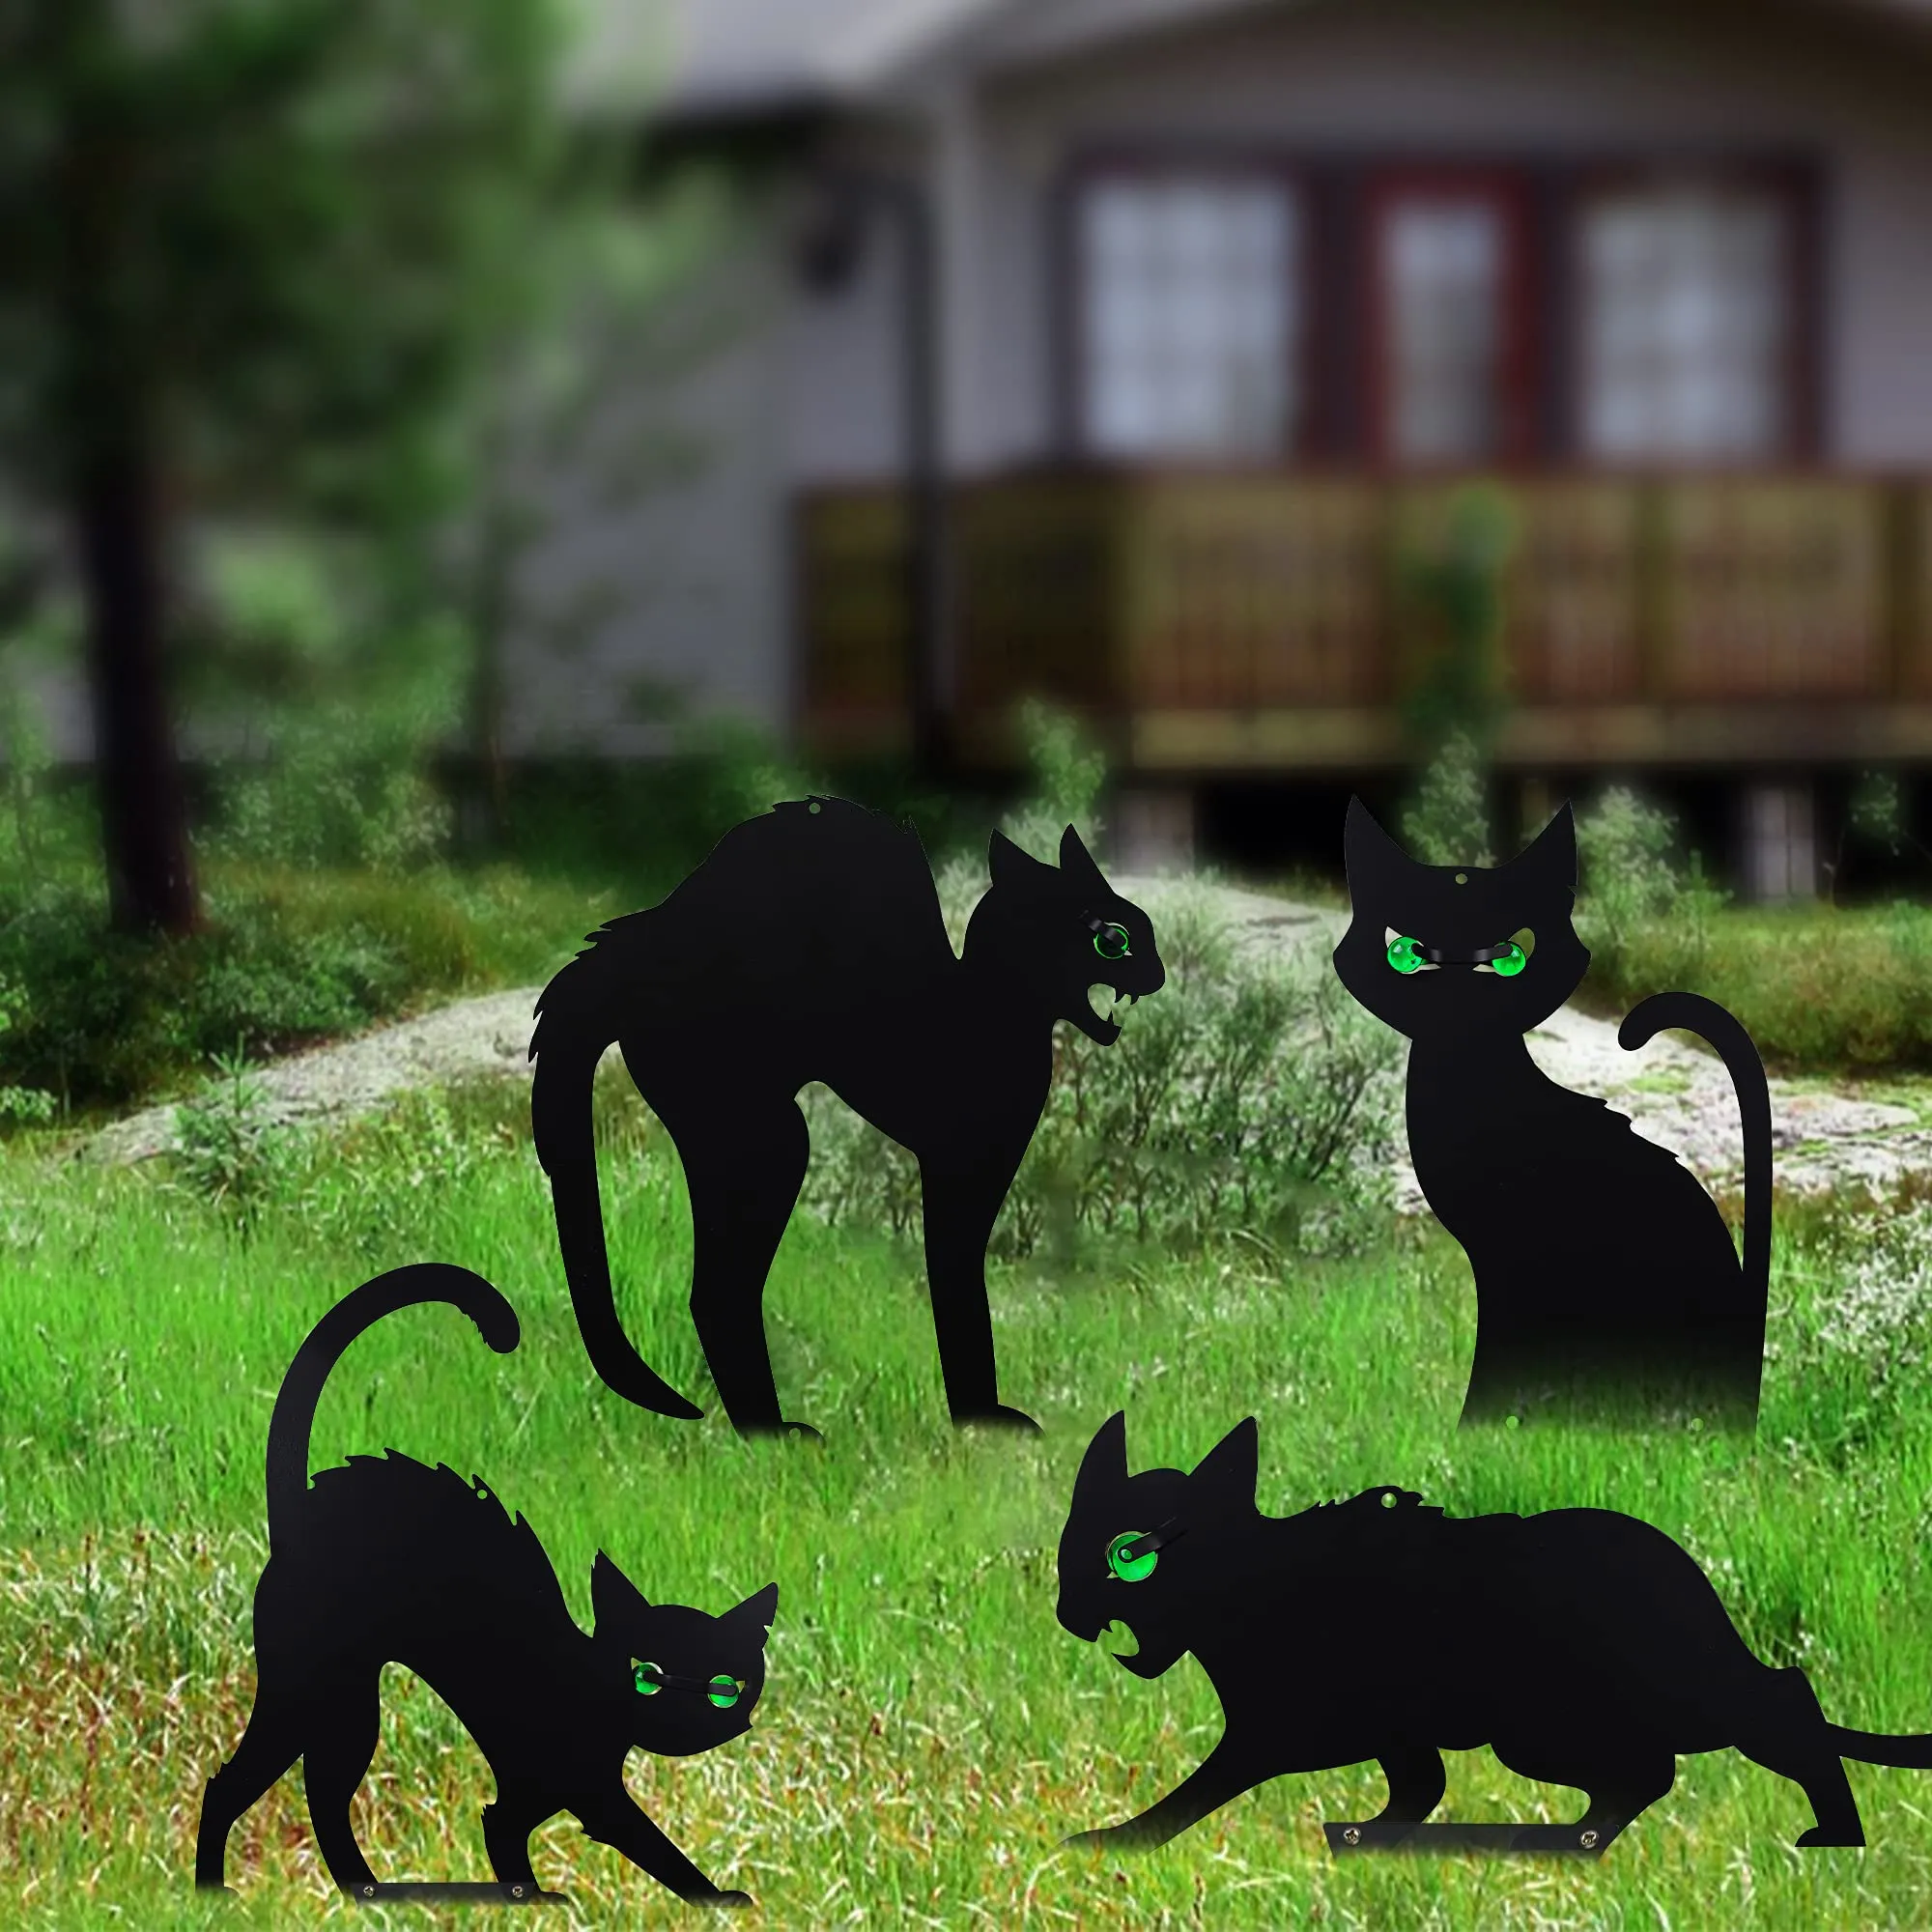 You are currently viewing The Ultimate Guide to Black Cat Halloween Decorations